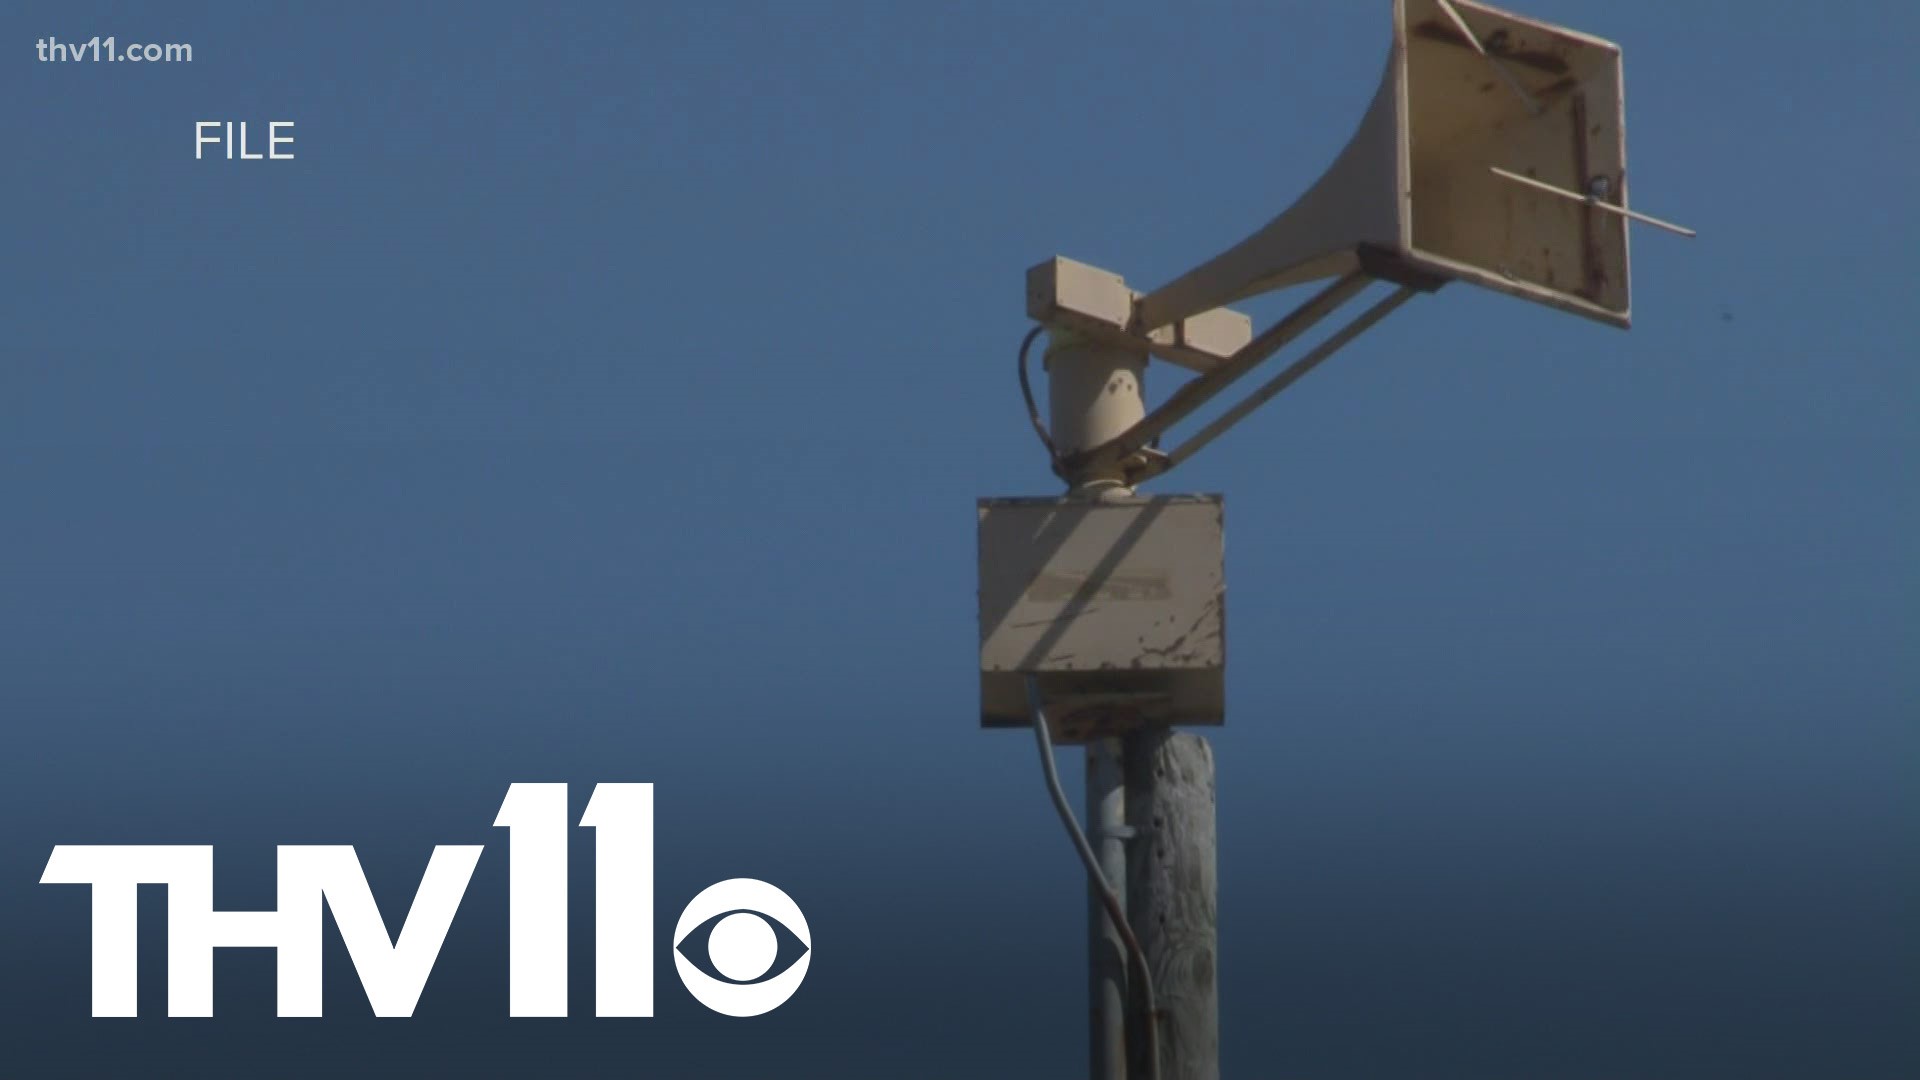 The sound of tornado sirens going off could soon be a thing of the past in Drew County.